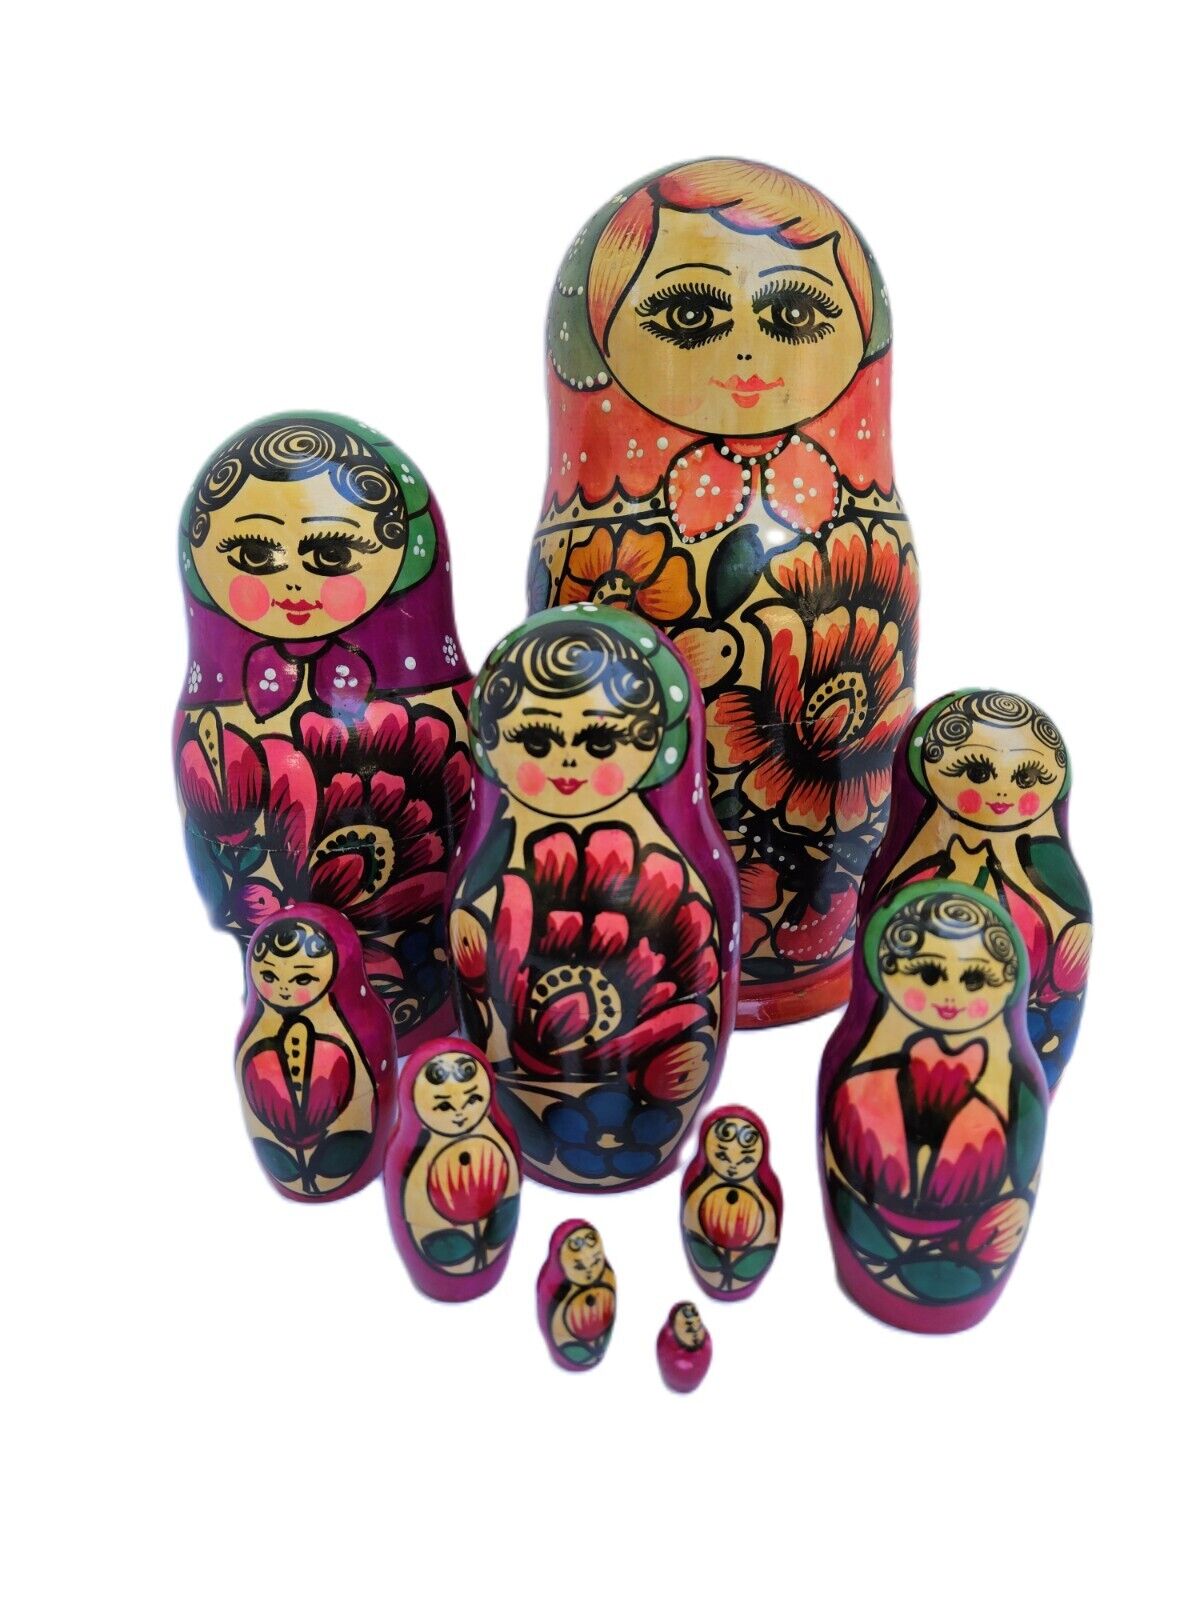 Russian Nesting Dolls Colorful in Reds Pink, and Purple - Set of 10 -19 Pieces